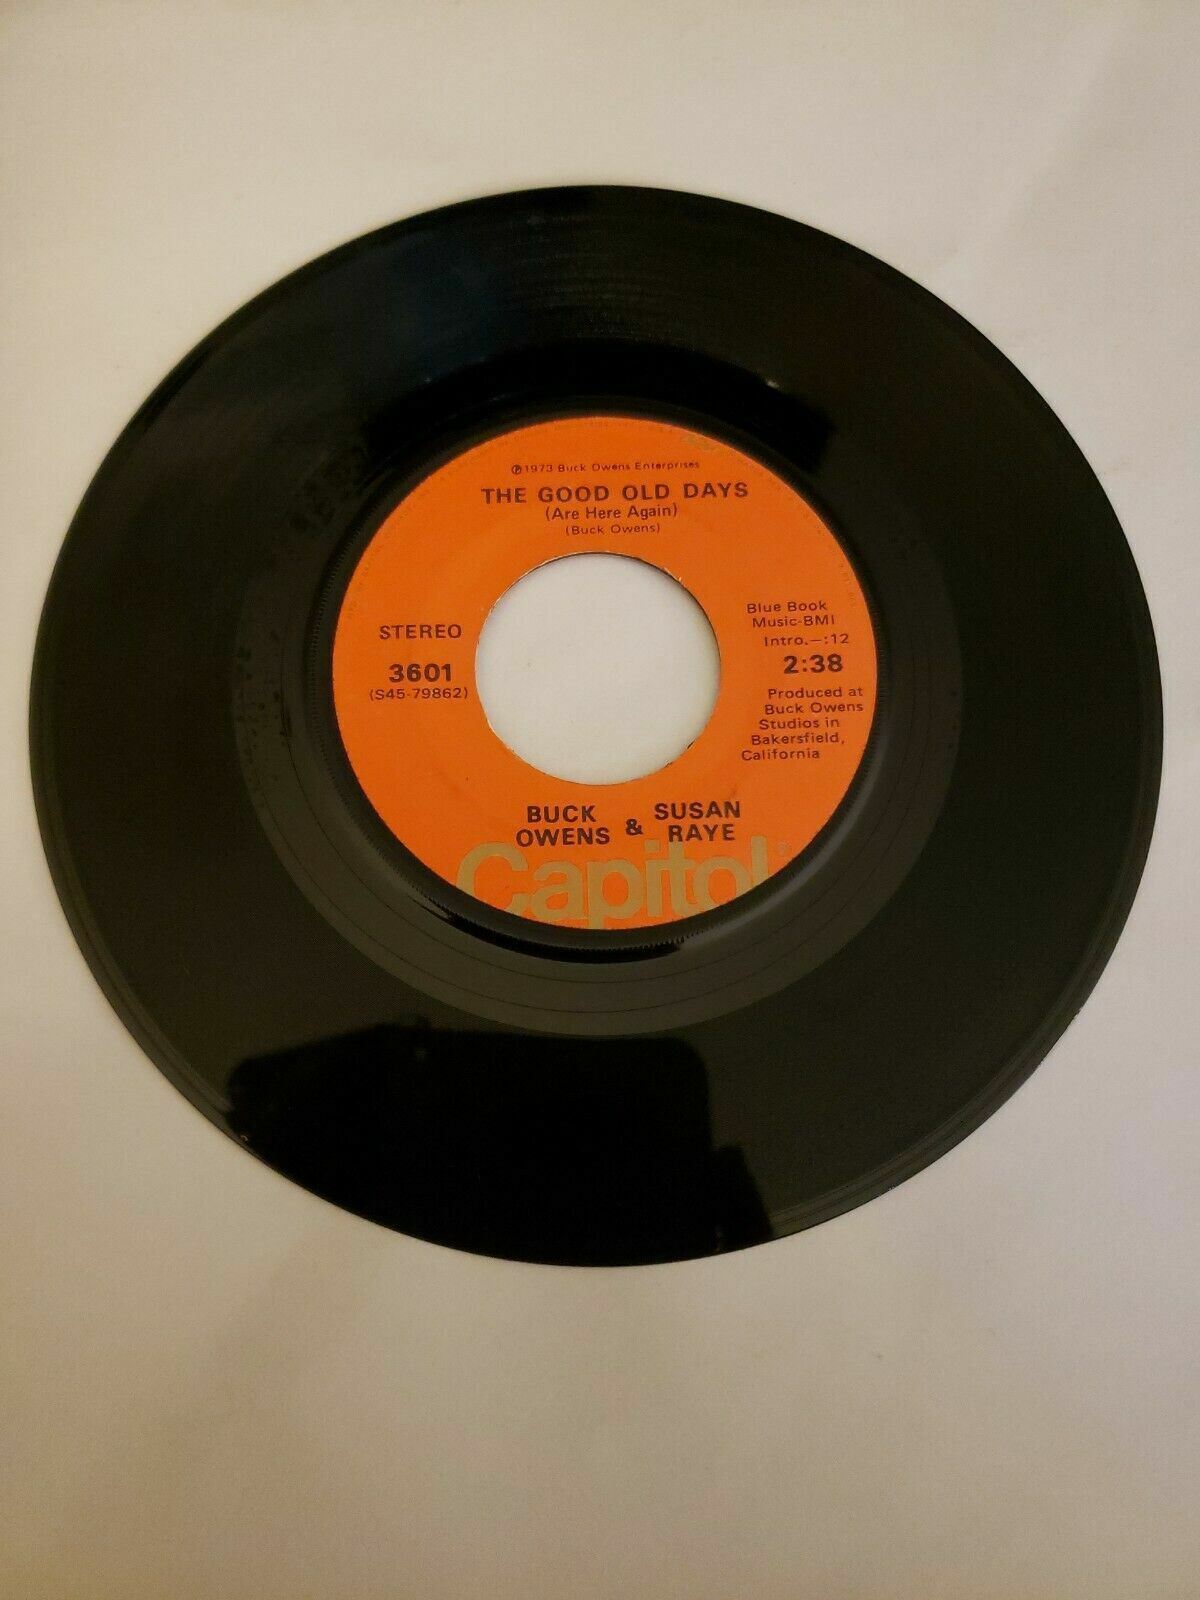 Buck Owens and Susan Raye - The Good Old Days - Capitol (45RPM 7”Single)(J515) 